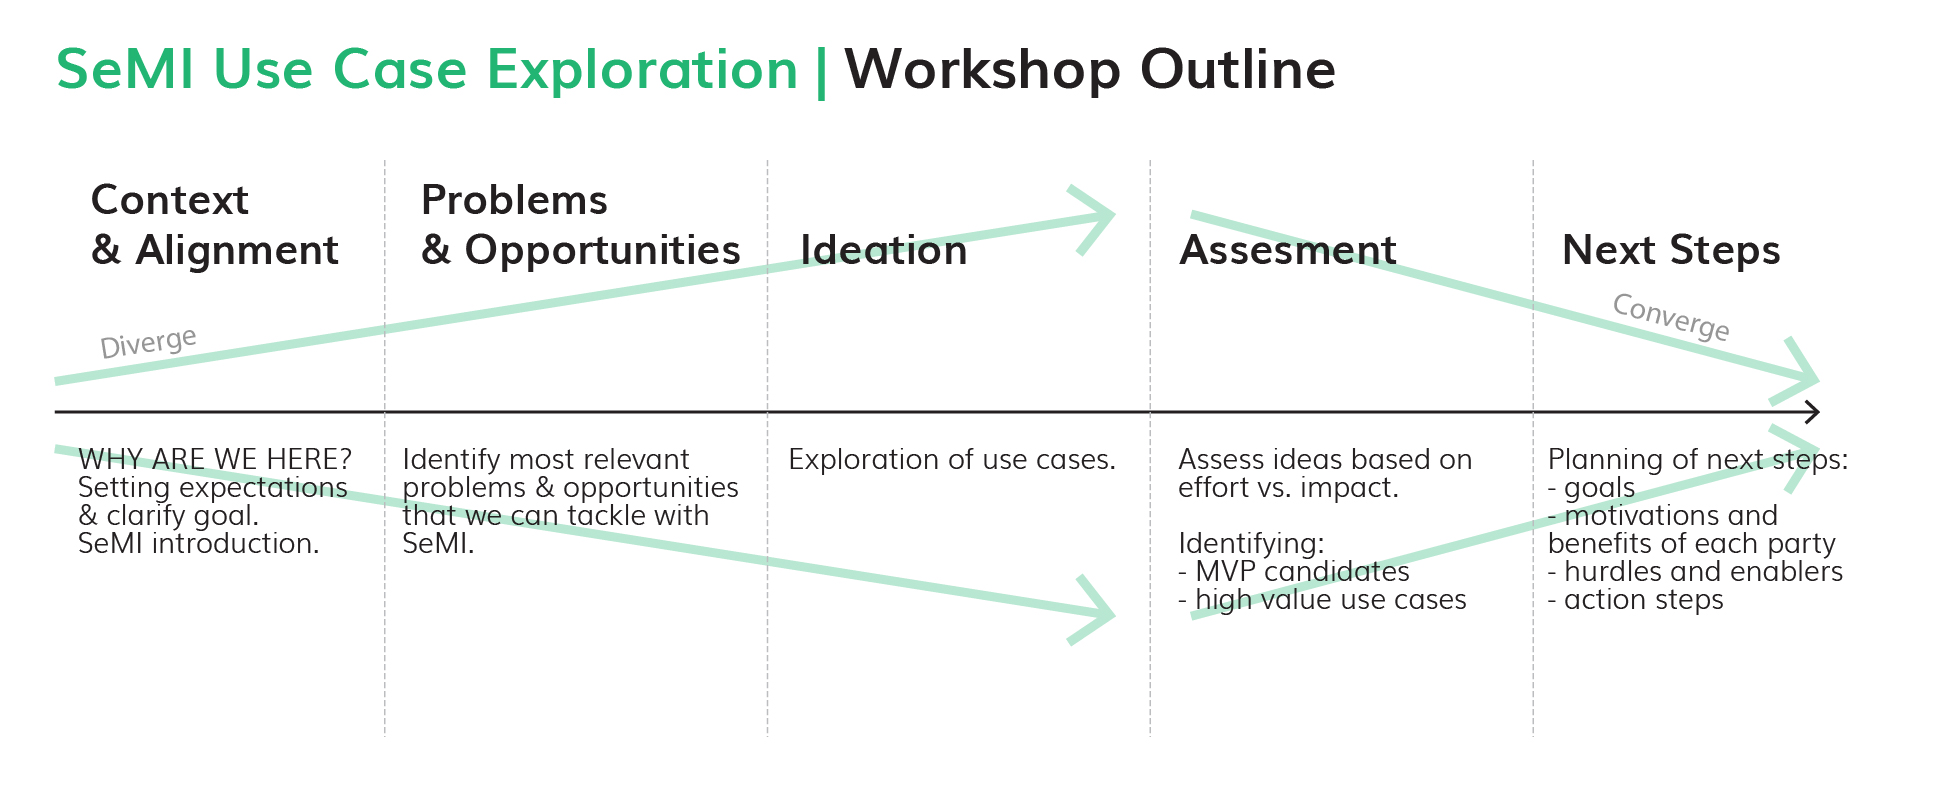 Outline of the SeMI exploration workshop showing the five steps from diverge to converge